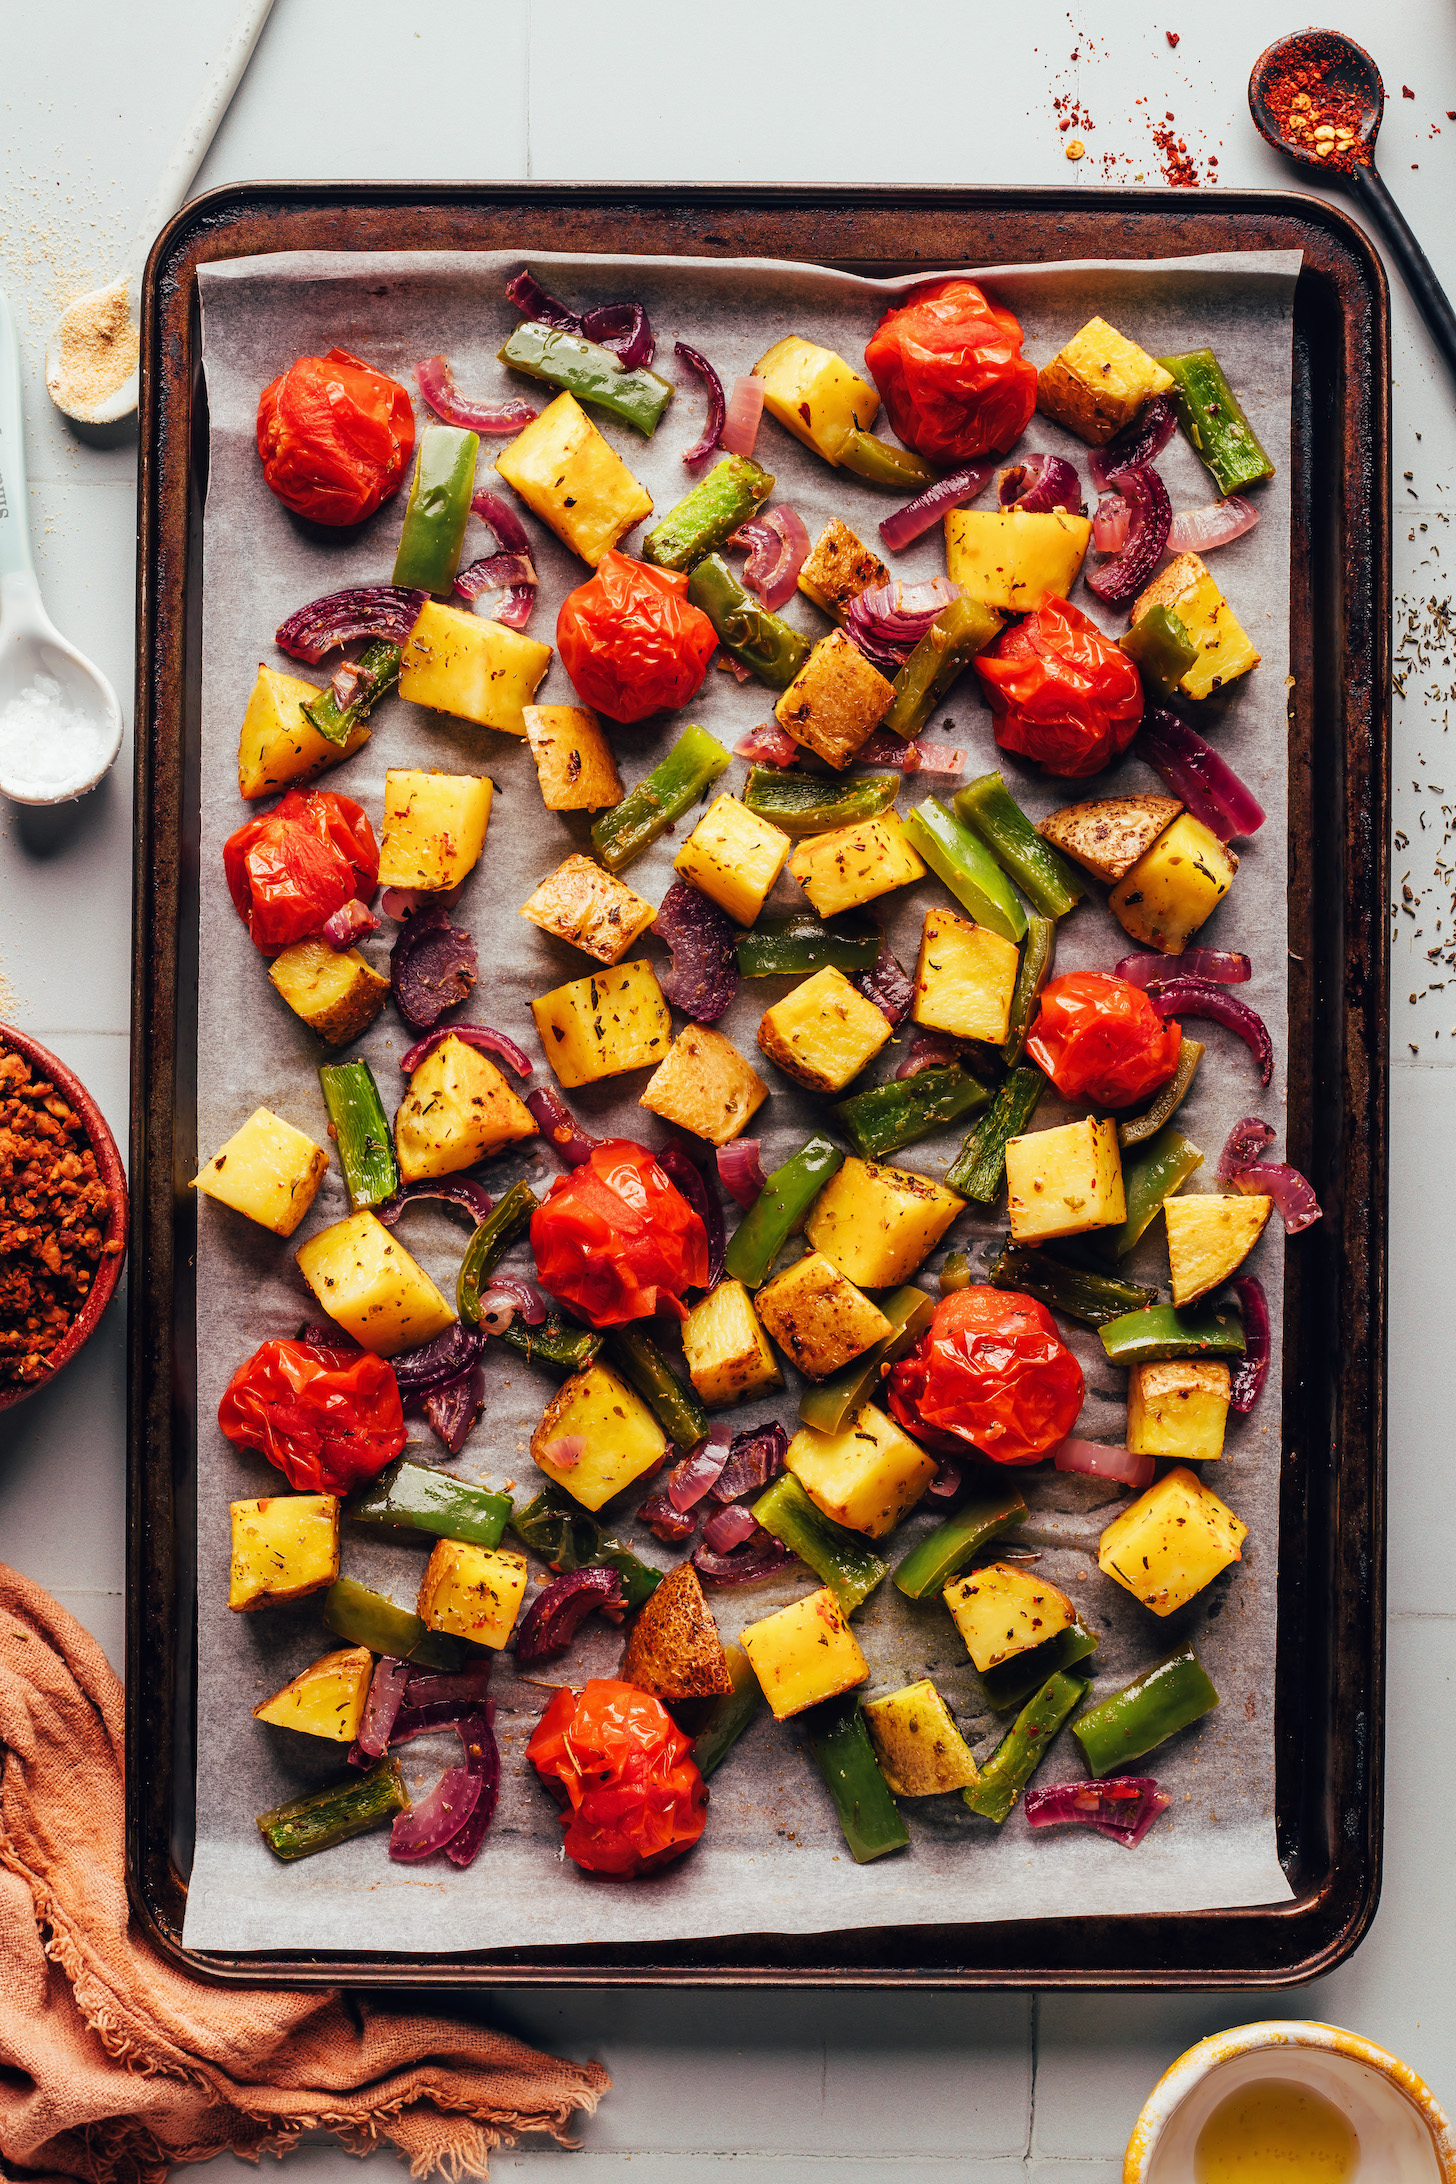 Baking sheet with roasted potatoes, red onions, green bell peppers and cherry tomatoes